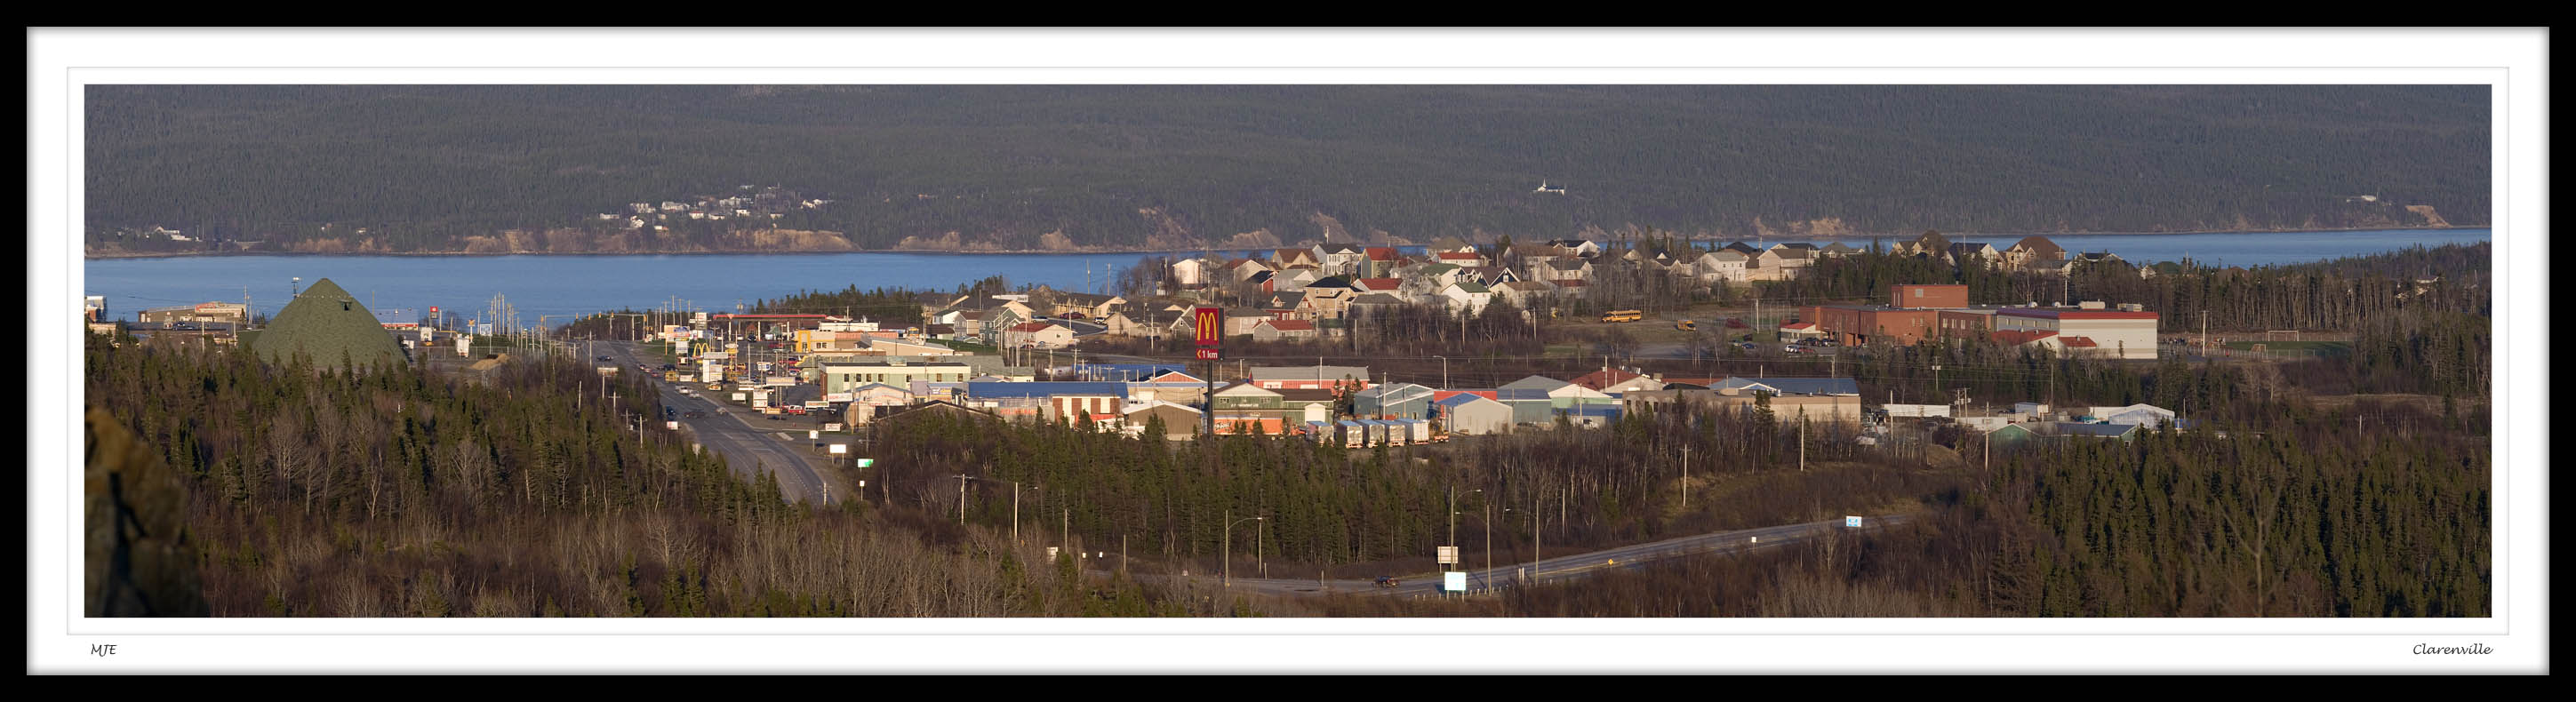 Clarenville as seen from the White Hills Road on May 23, 2007.